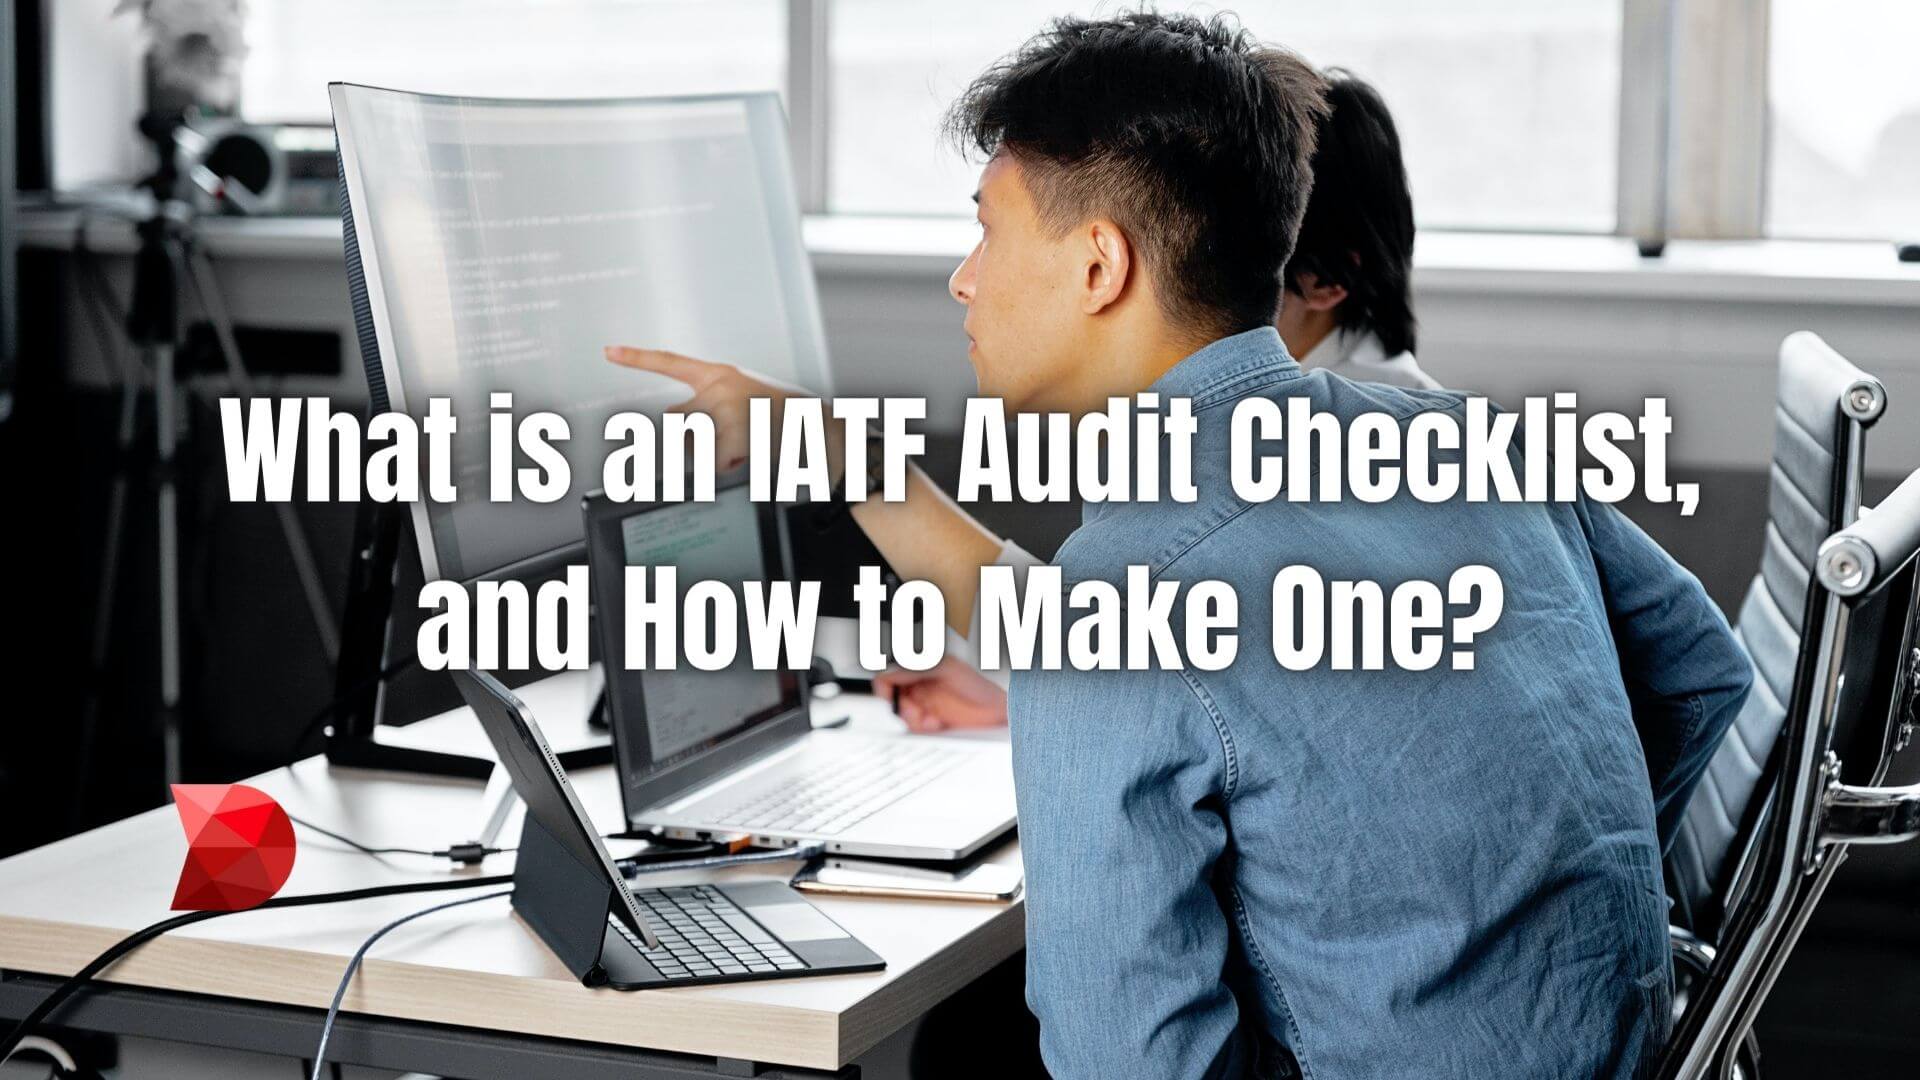 Navigate IATF audit checklists seamlessly! Here's how to make a robust checklist for automotive compliance and operational efficiency.